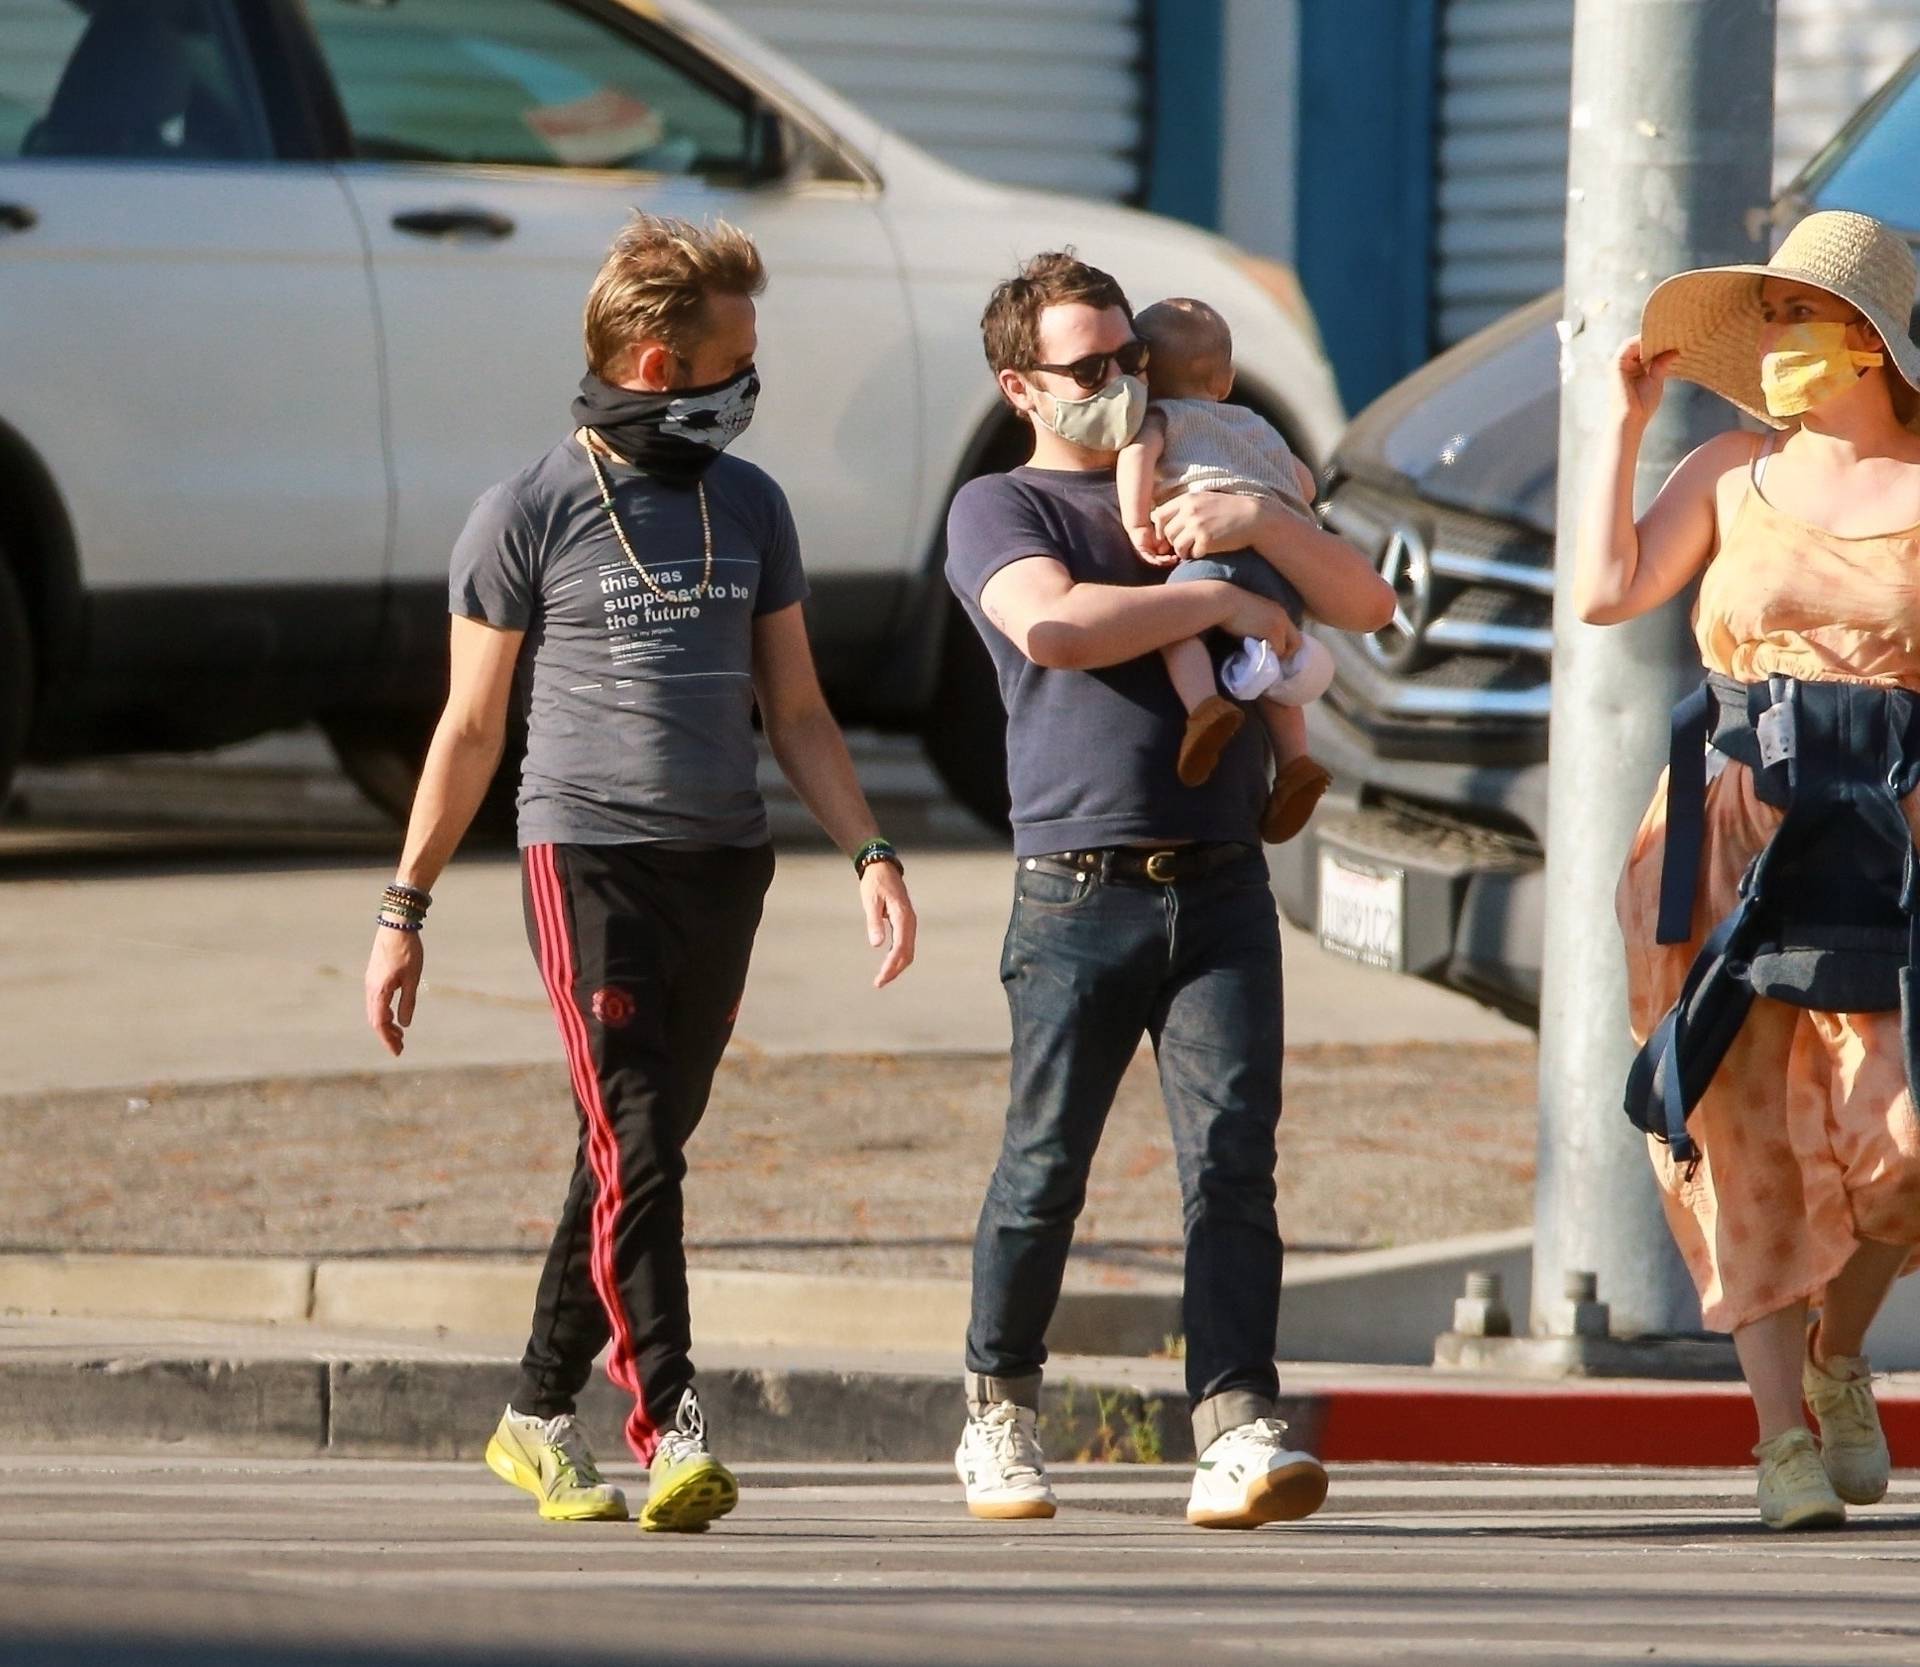 *EXCLUSIVE* Elijah Wood goes for a stroll with his baby and actor pal Dominic Monaghan